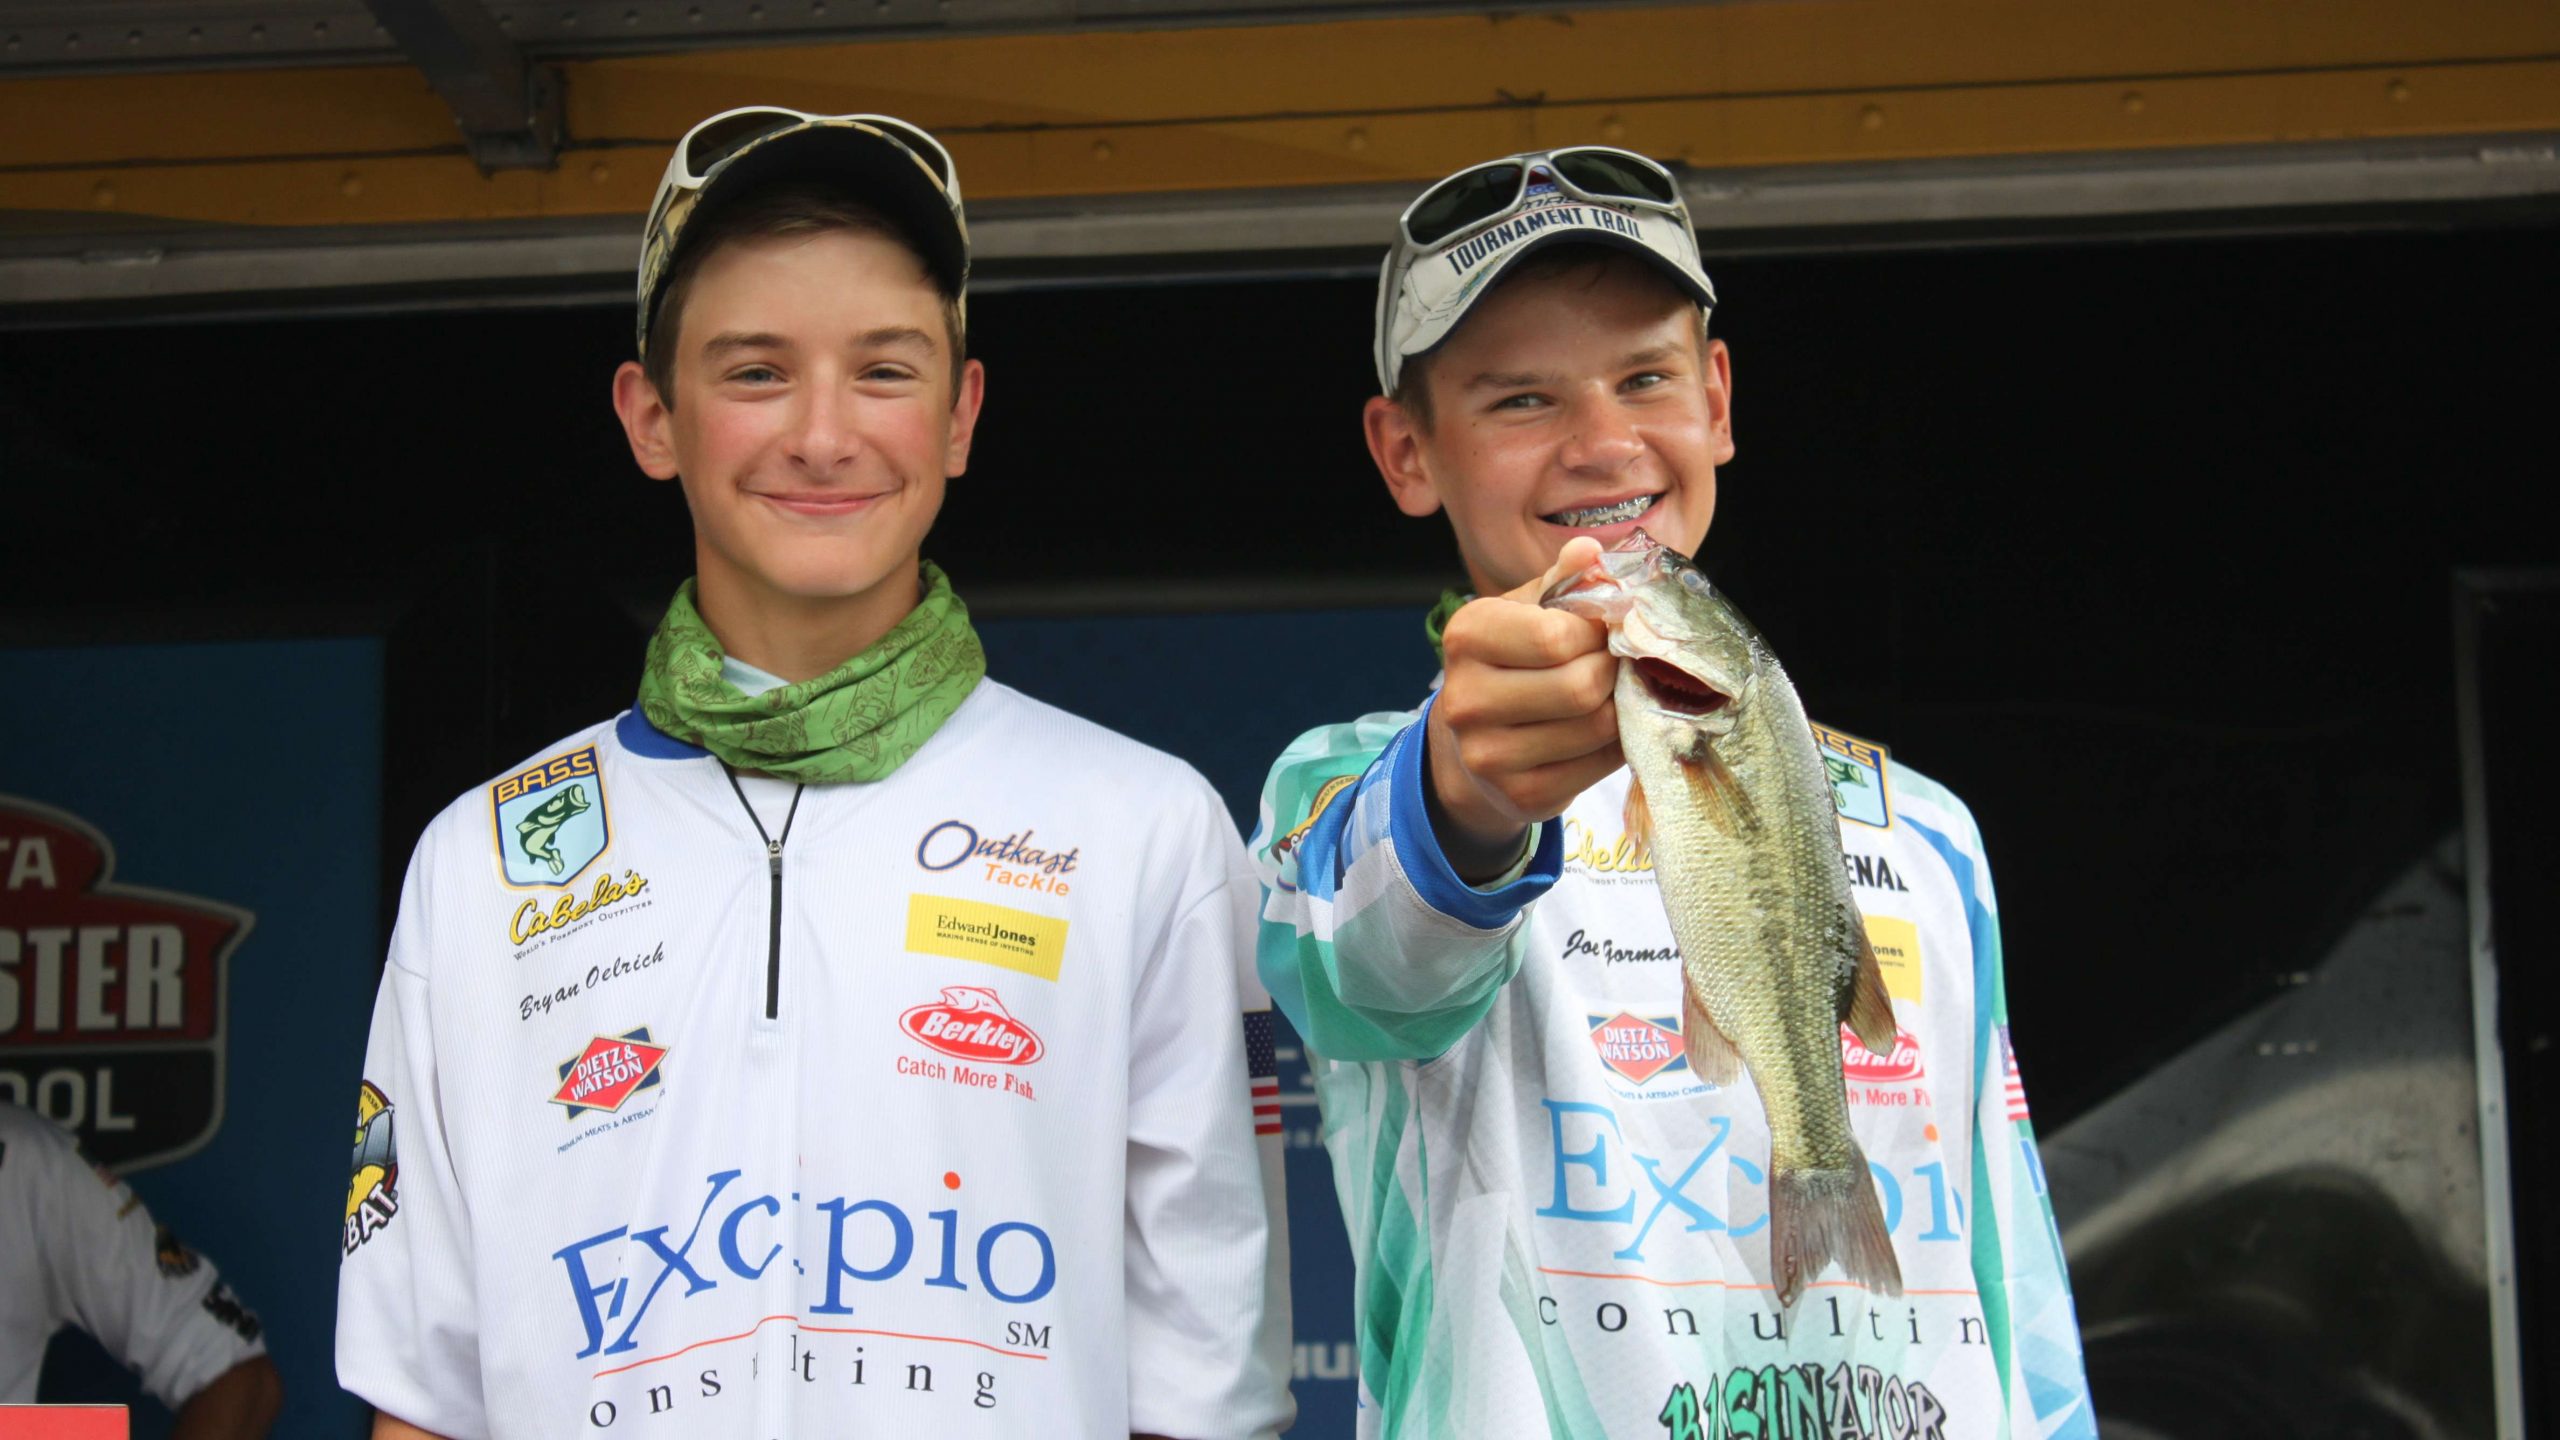 Joseph Gorman and Bryan Oelrich of Minnesota caught an 11-ounce bass that has them in a tie for 25th place.